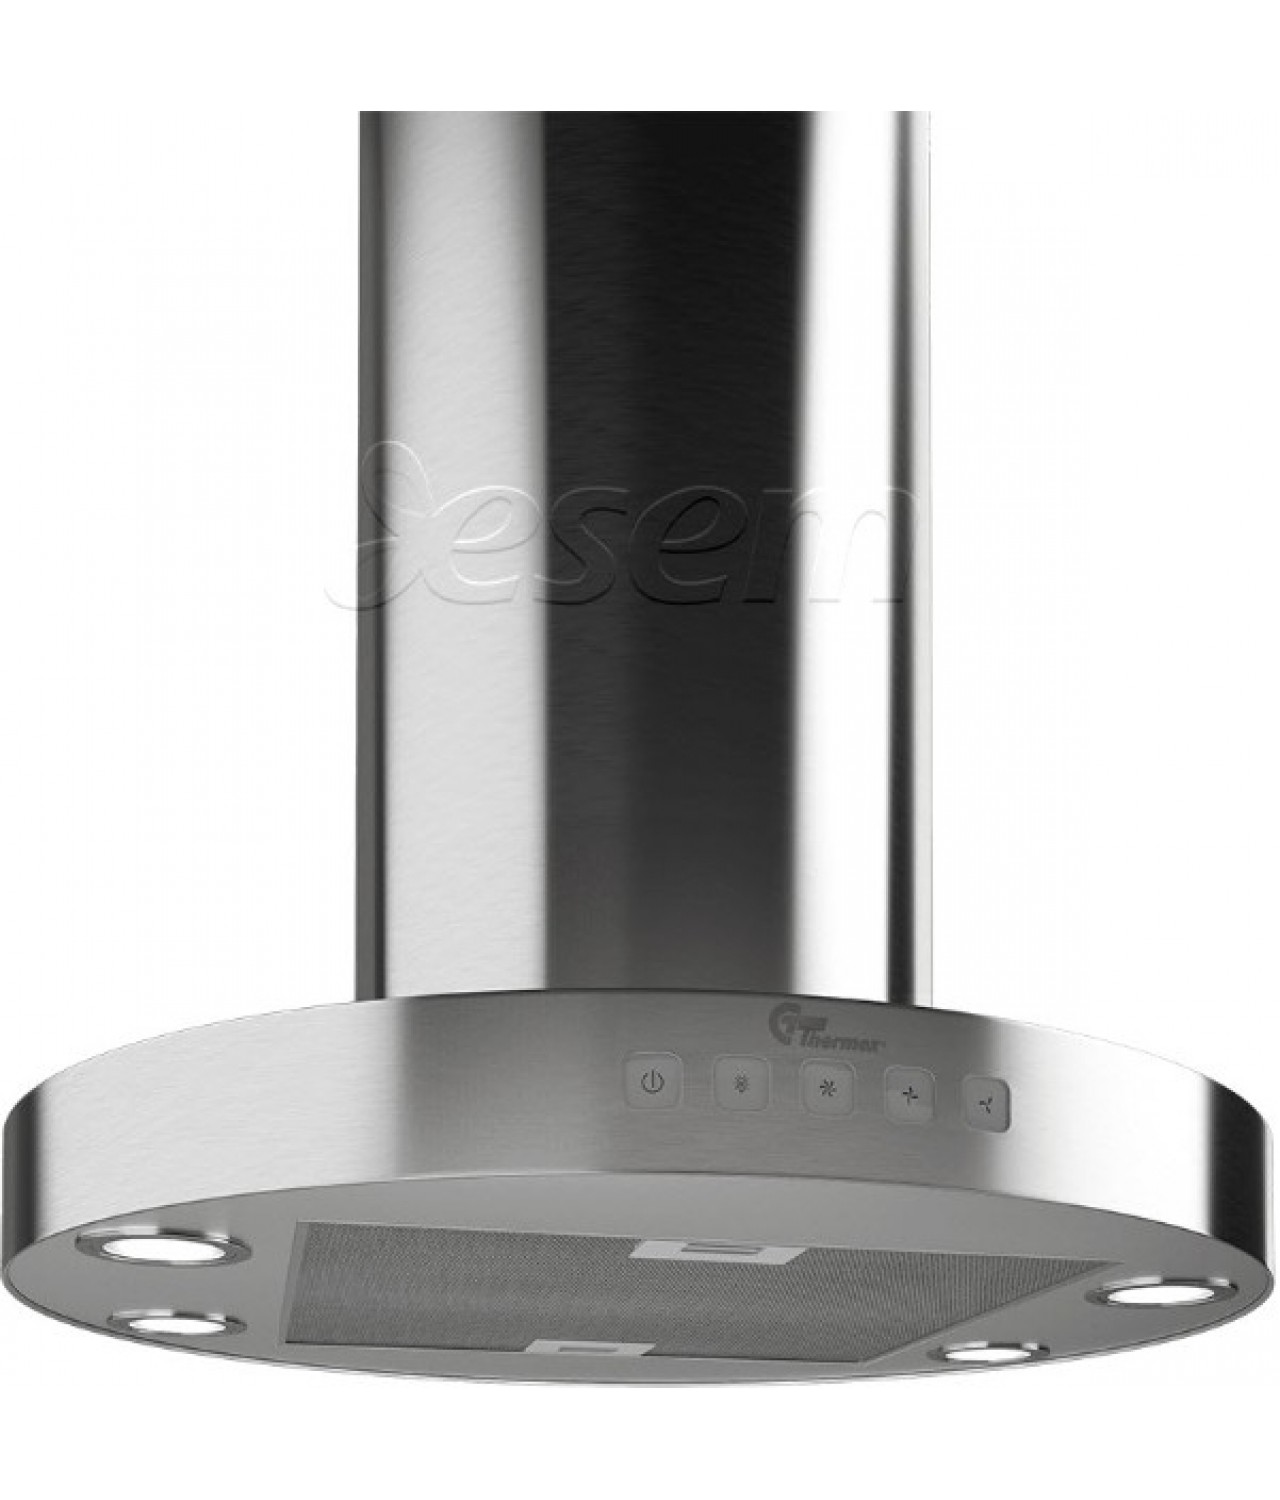 Island cooker hoods Oxford 600 stainless steel